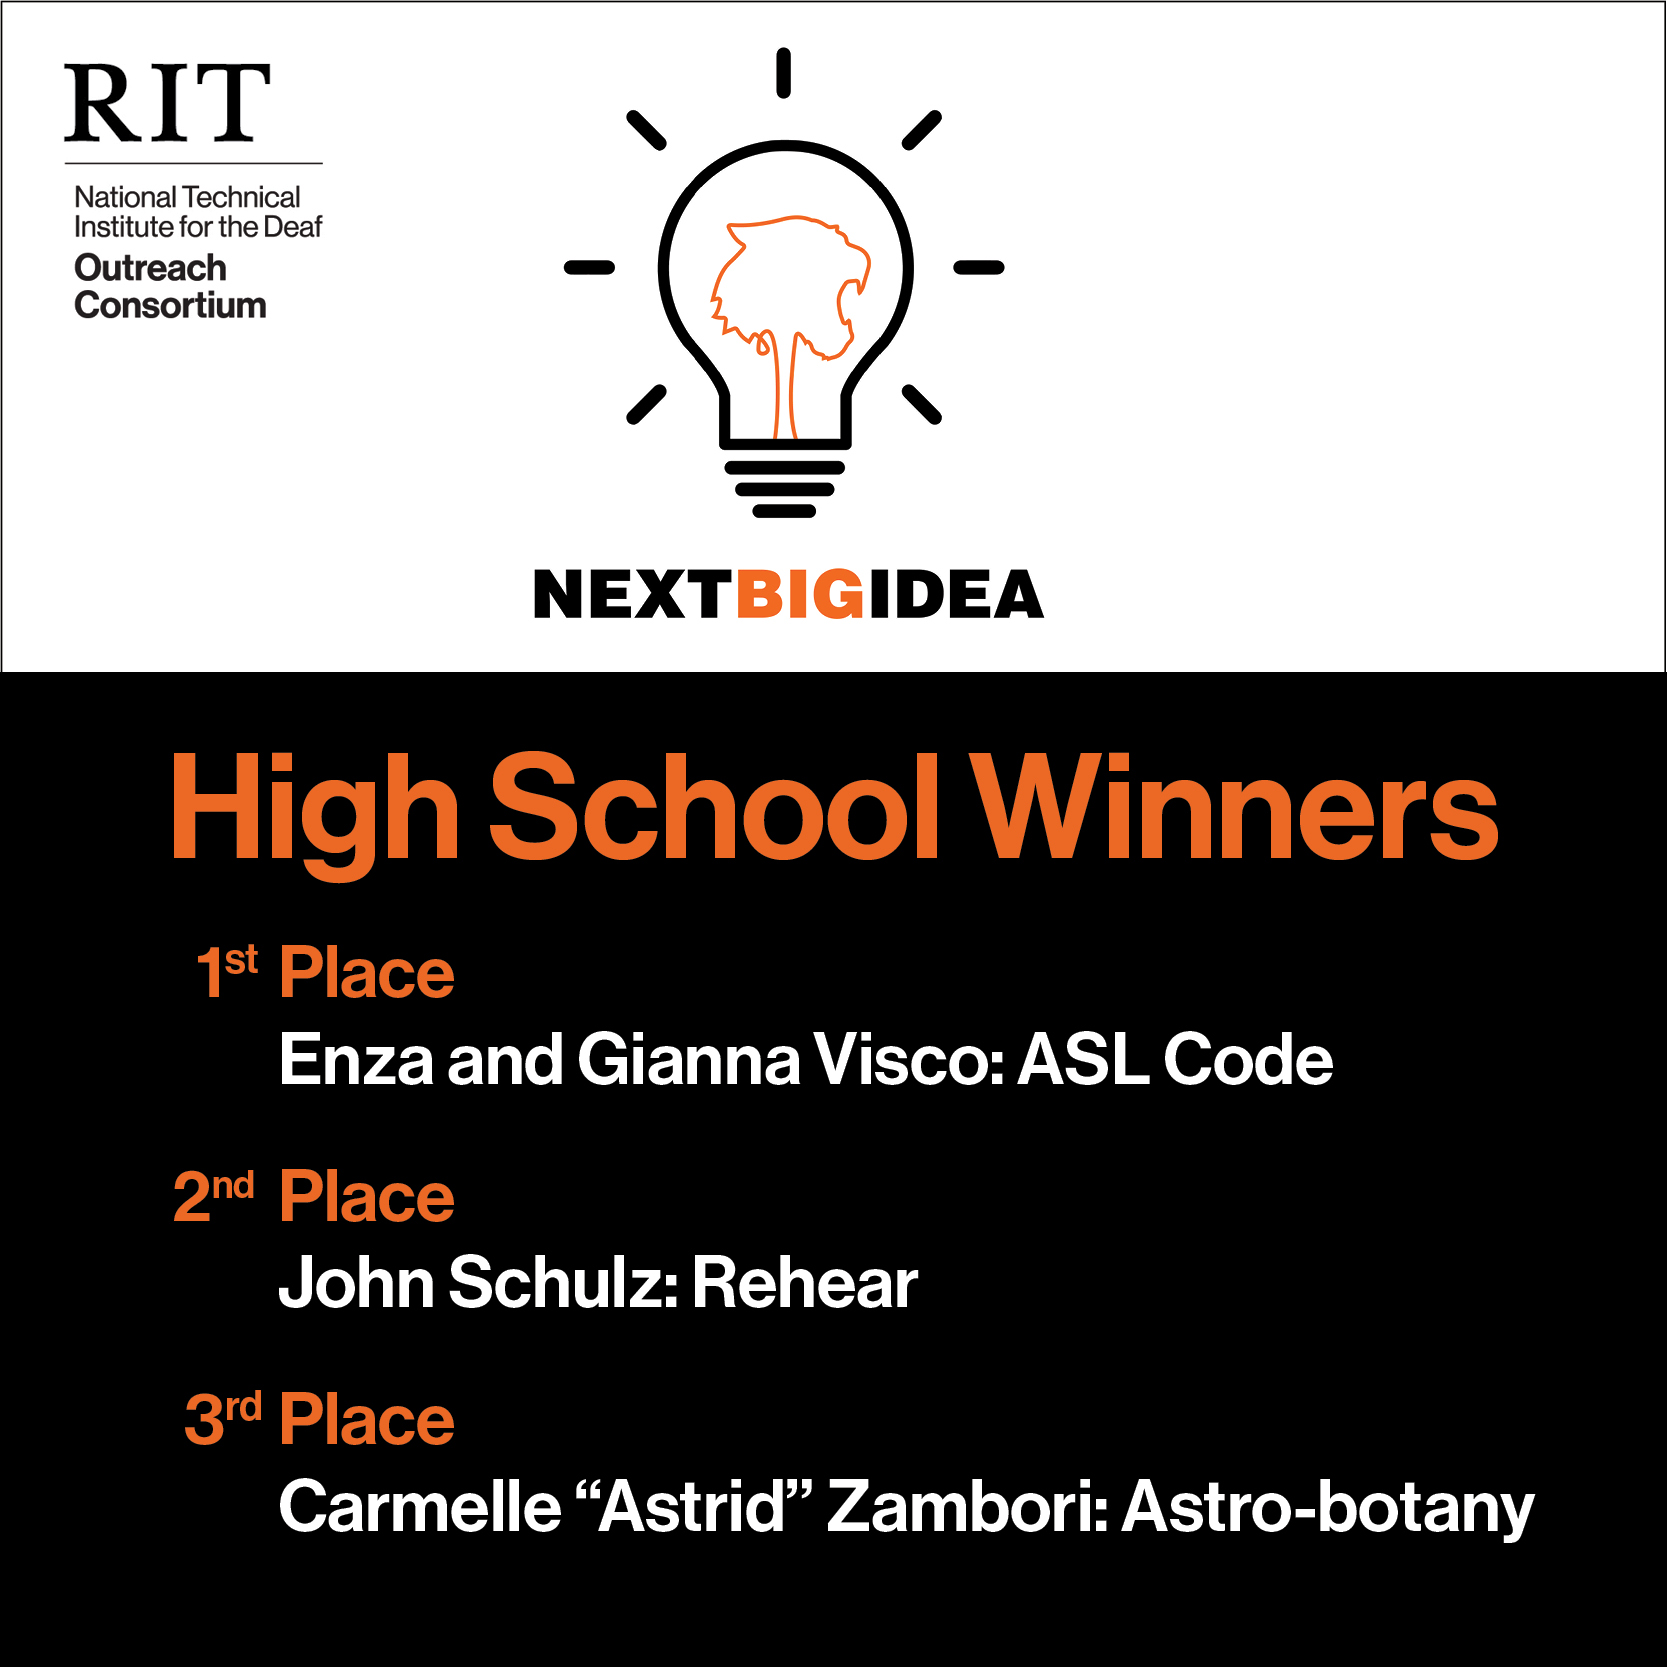 Graphic displaying the winners of the Next Big Idea: High School 2022 event. The top half of the graphic displays two logos – an RIT/NTID Outreach logo at the top left, and the Next Big Idea logo in the middle. The bottom half of the graphic displays the winners with the text “High School Winners: 1st place; Enza and Gianna Visco: ASL Code. 2nd place; John Schulz: Rehear. 3rd place; Carmelle “Astrid” Zambori: Astro-botany.”